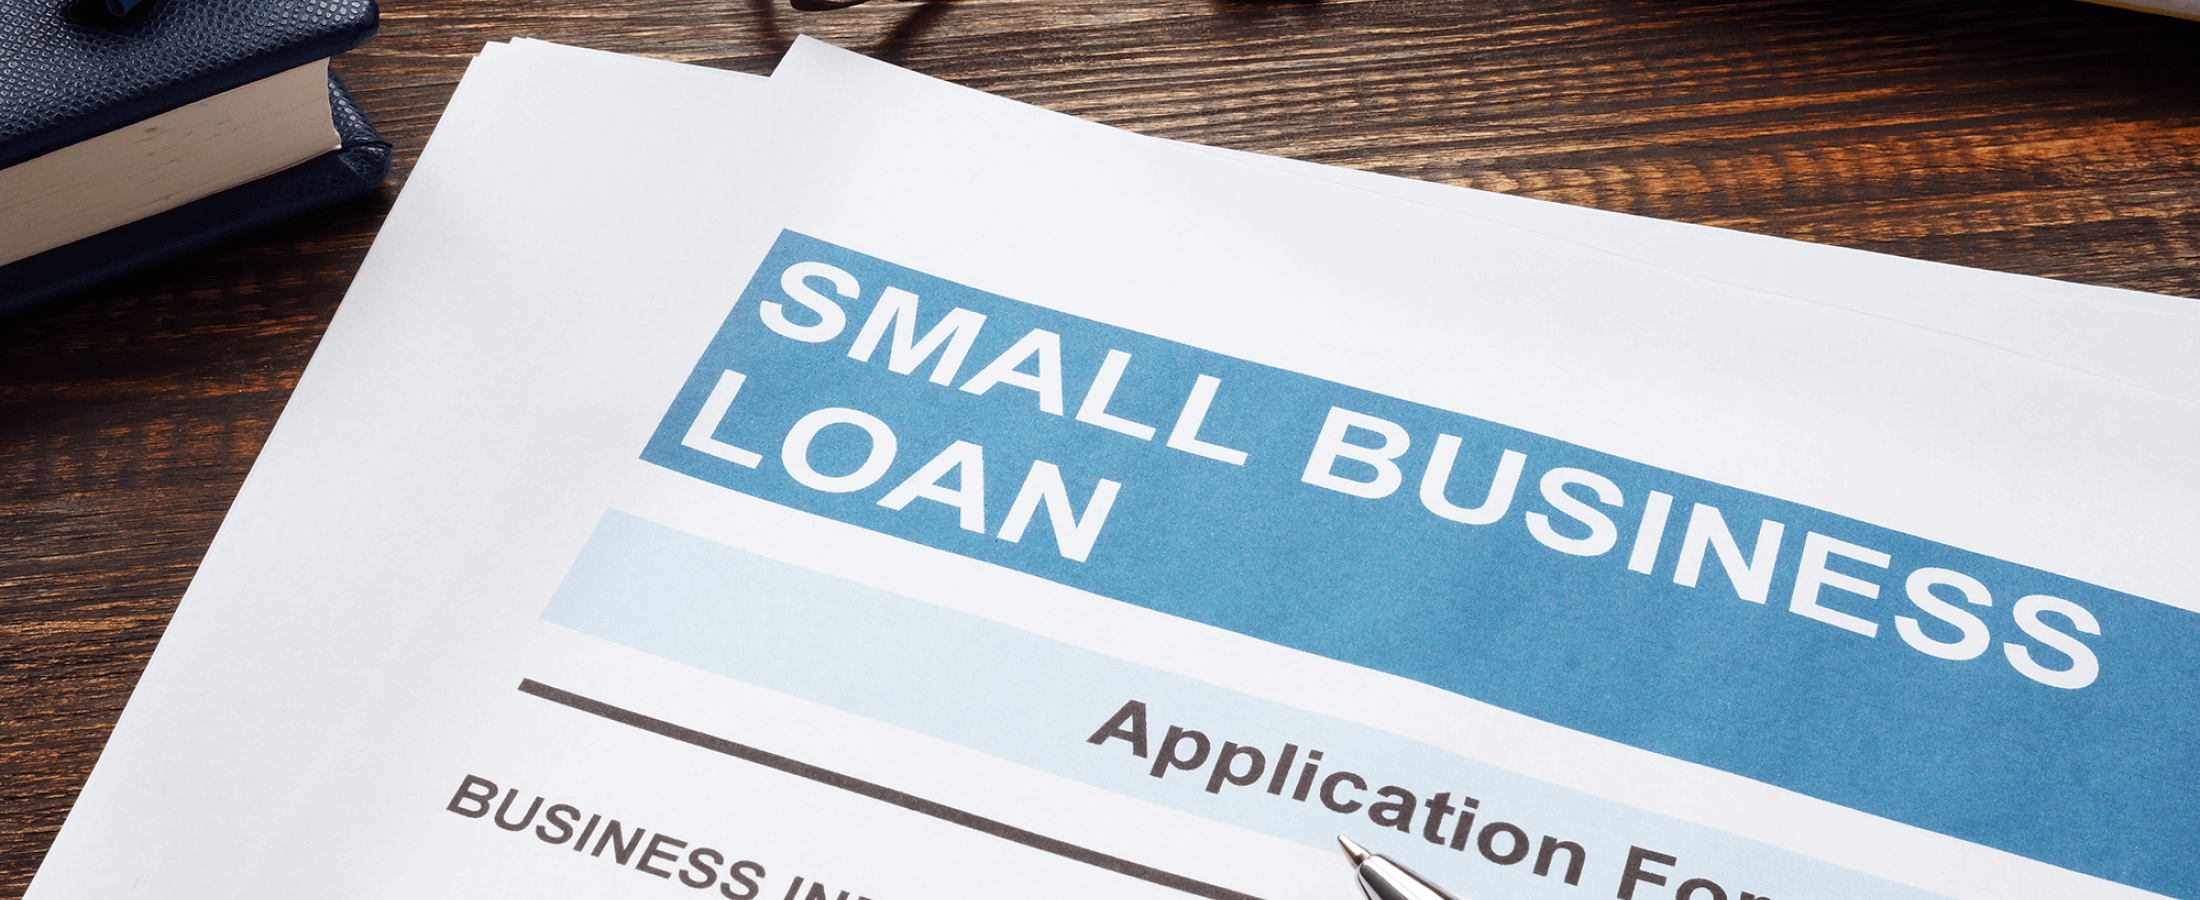 Obtaining financing and funding for your small business